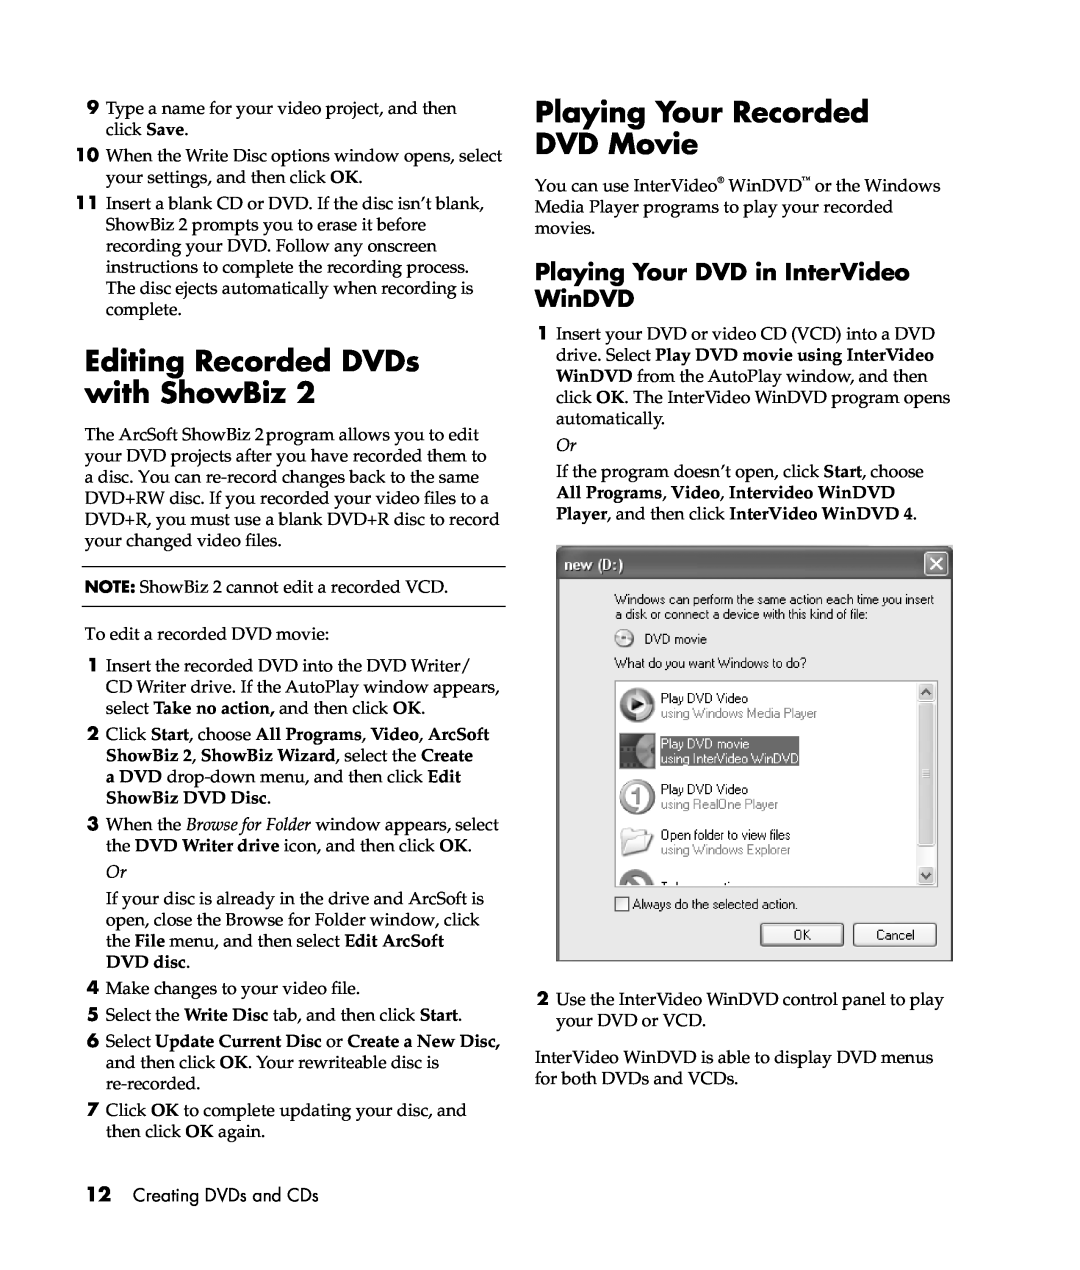 HP m577.uk Editing Recorded DVDs with ShowBiz, Playing Your Recorded DVD Movie, Playing Your DVD in InterVideo WinDVD 